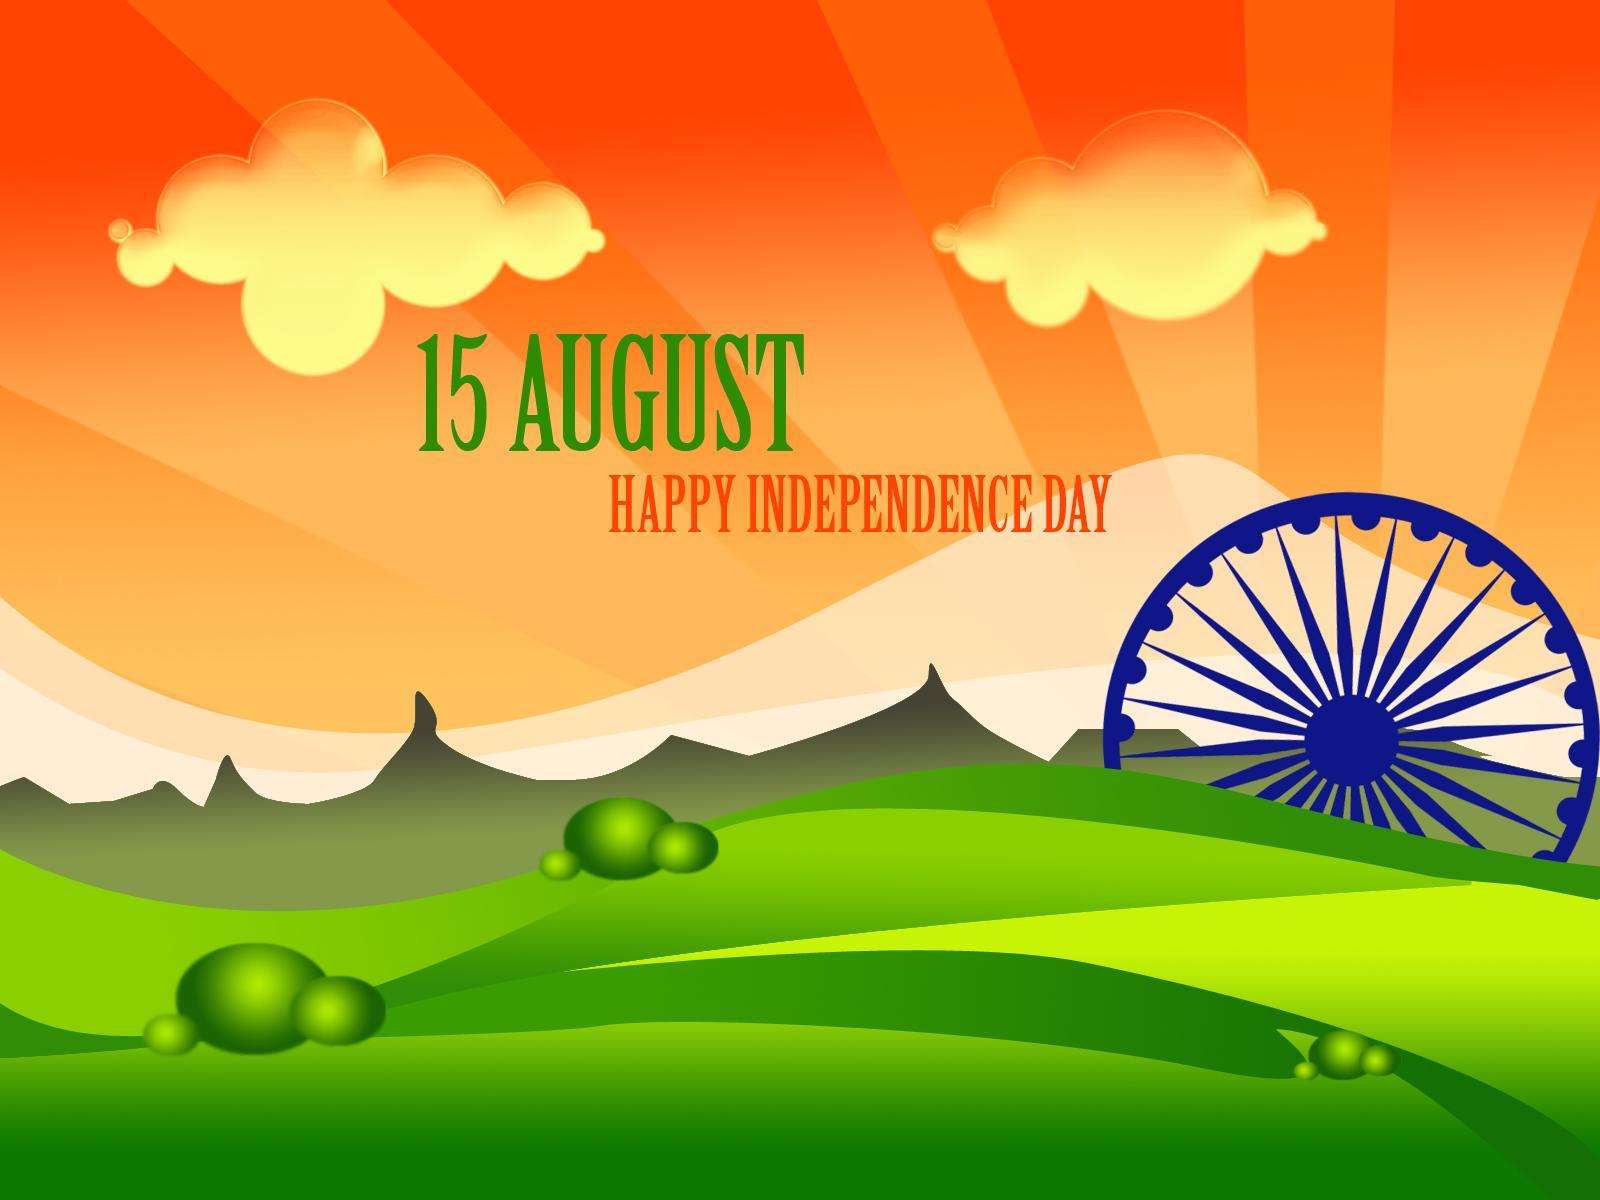 Happy Independence Day 2014 Image Wallpaper Photo Free Download